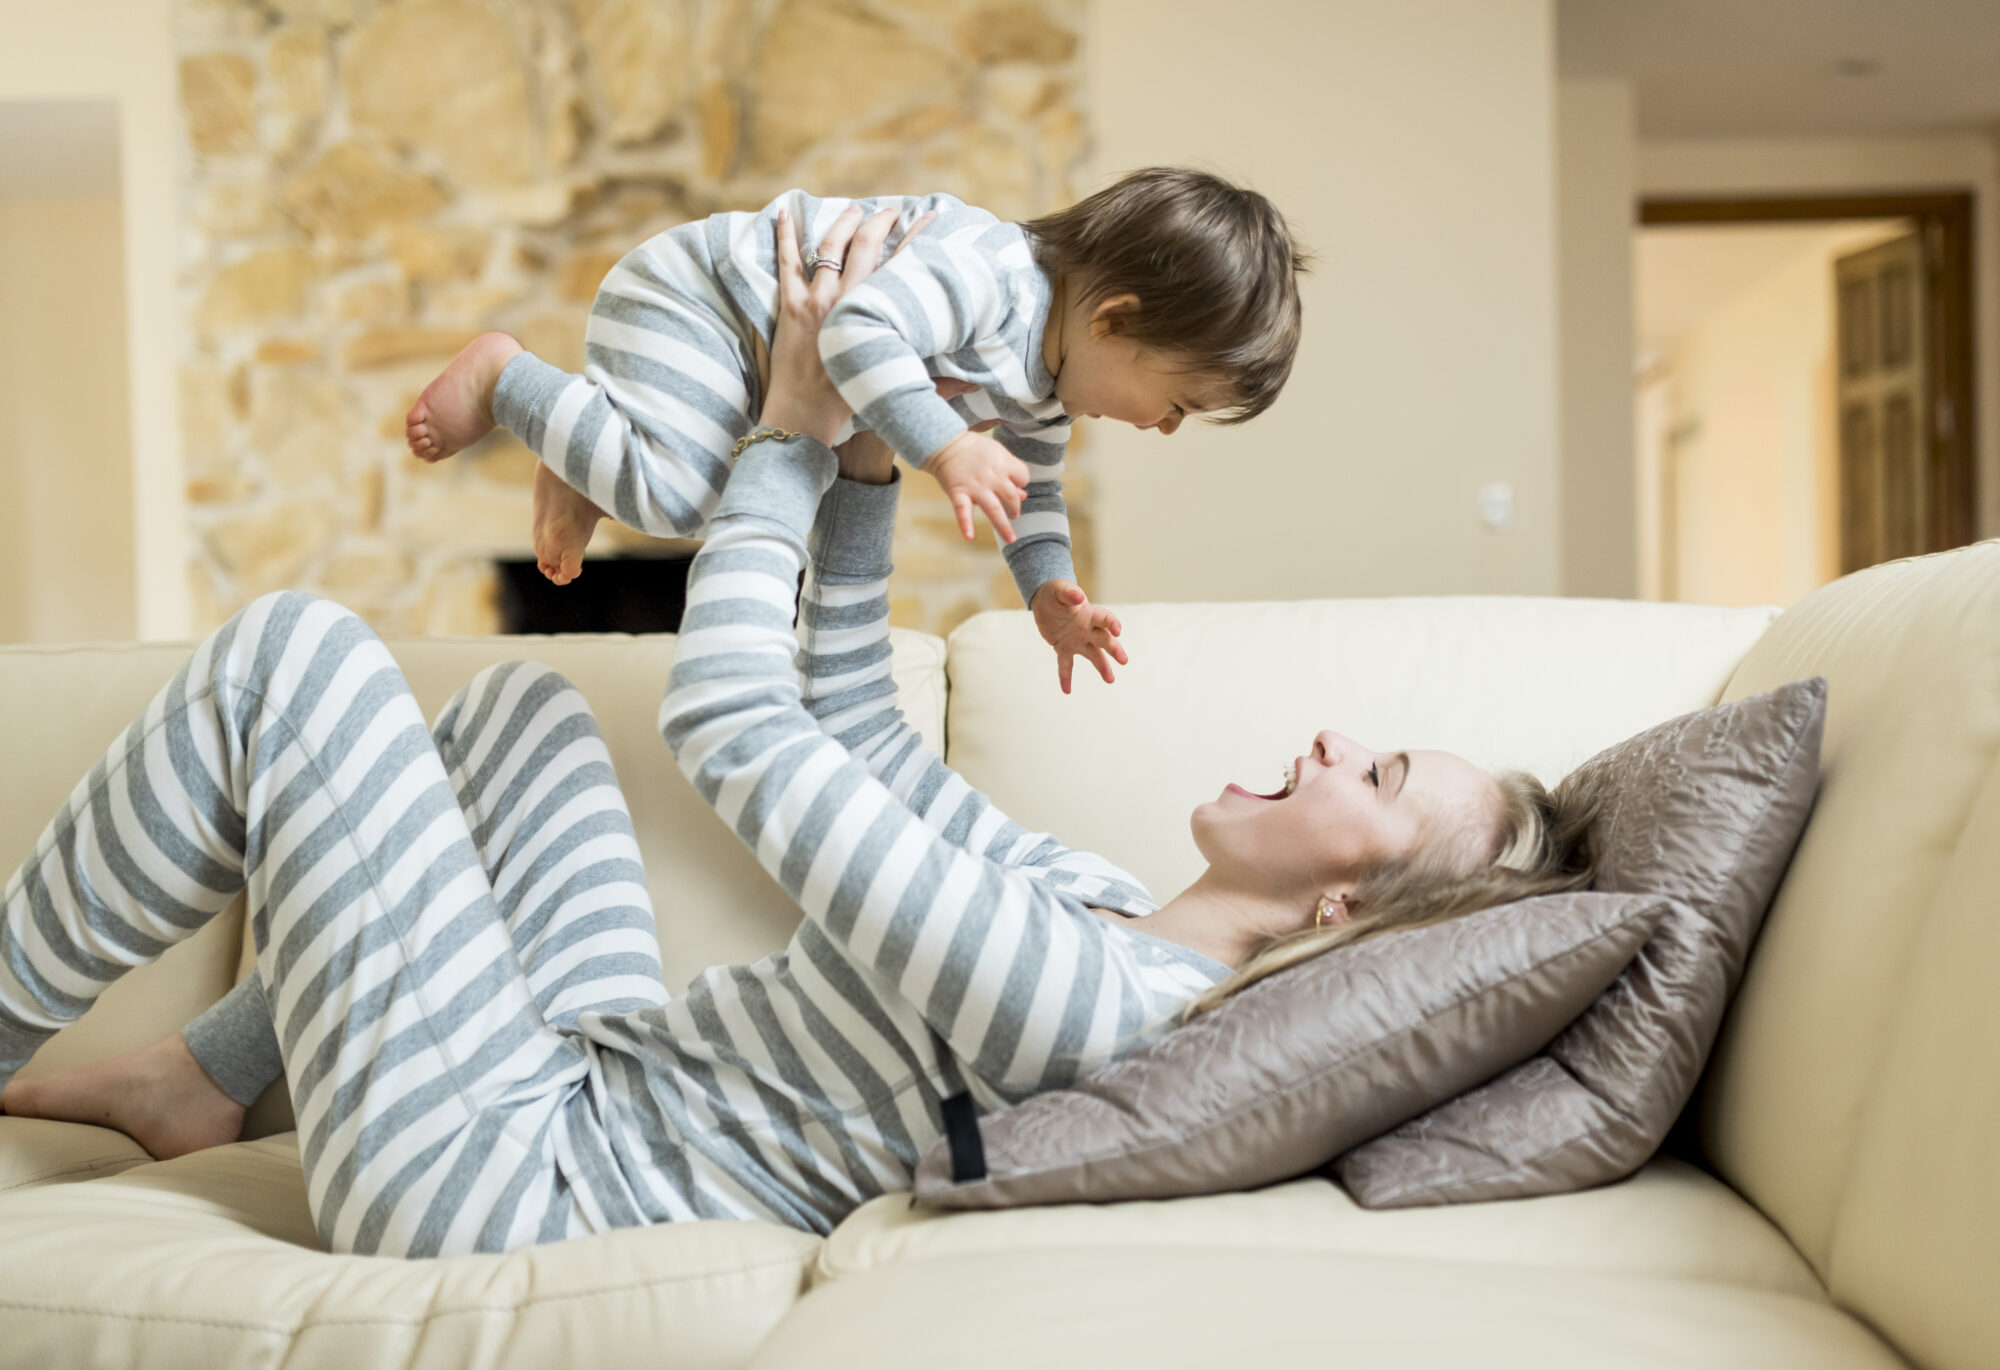 A mother picks up her smiling son above her while reclined on the couch. They are both wearing matching striped pajamas on the couch.